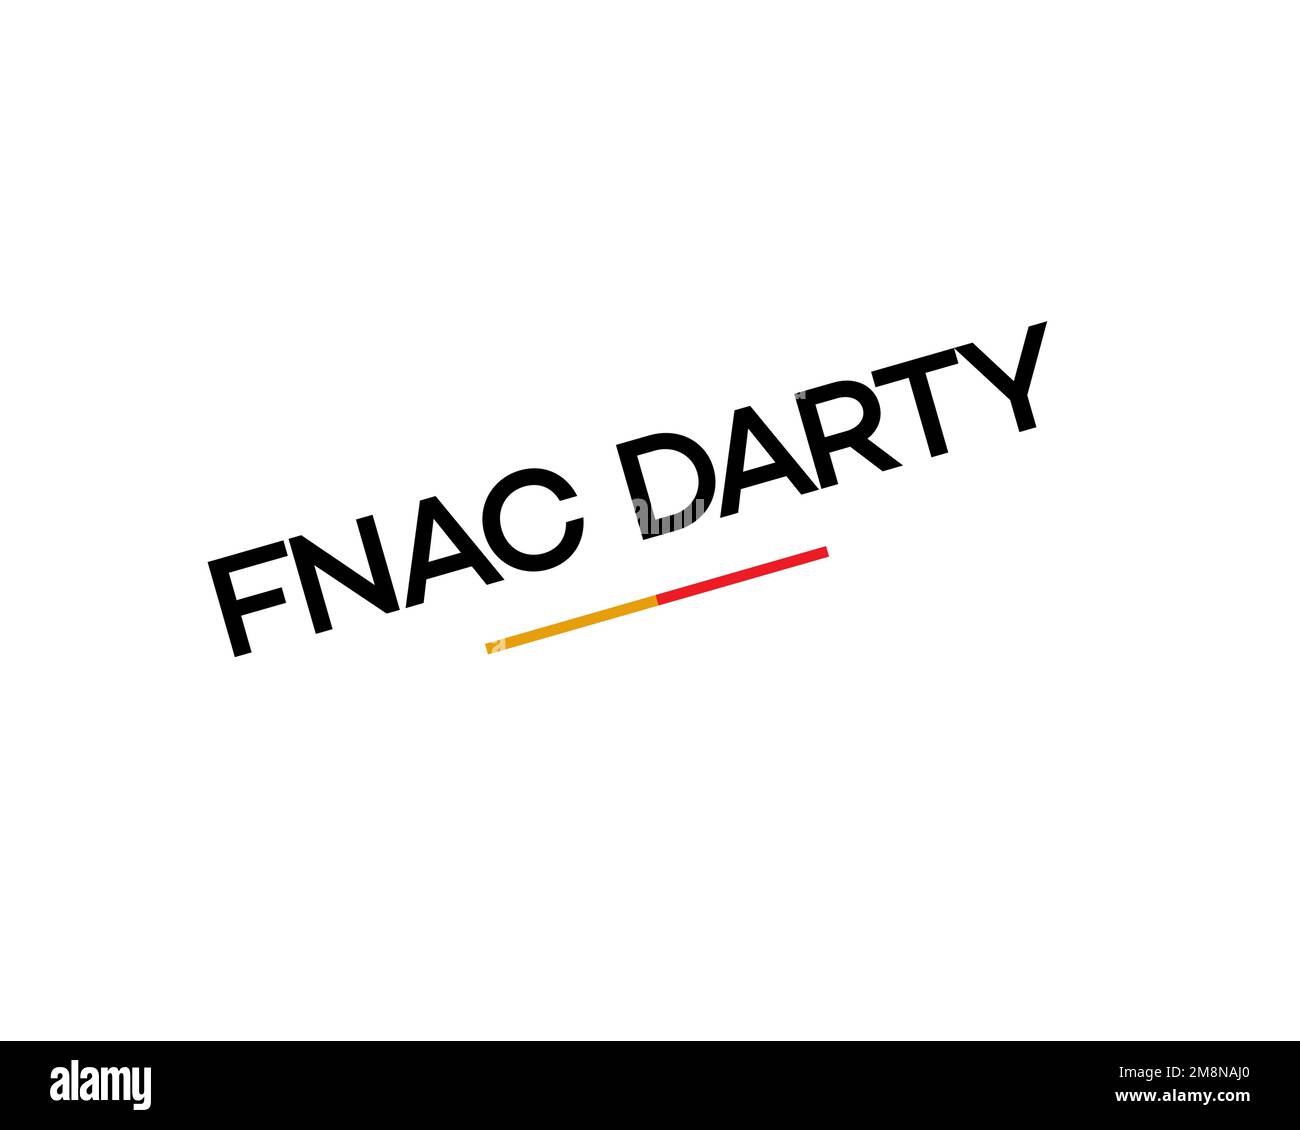 Fnac darty hi-res stock photography and images - Alamy